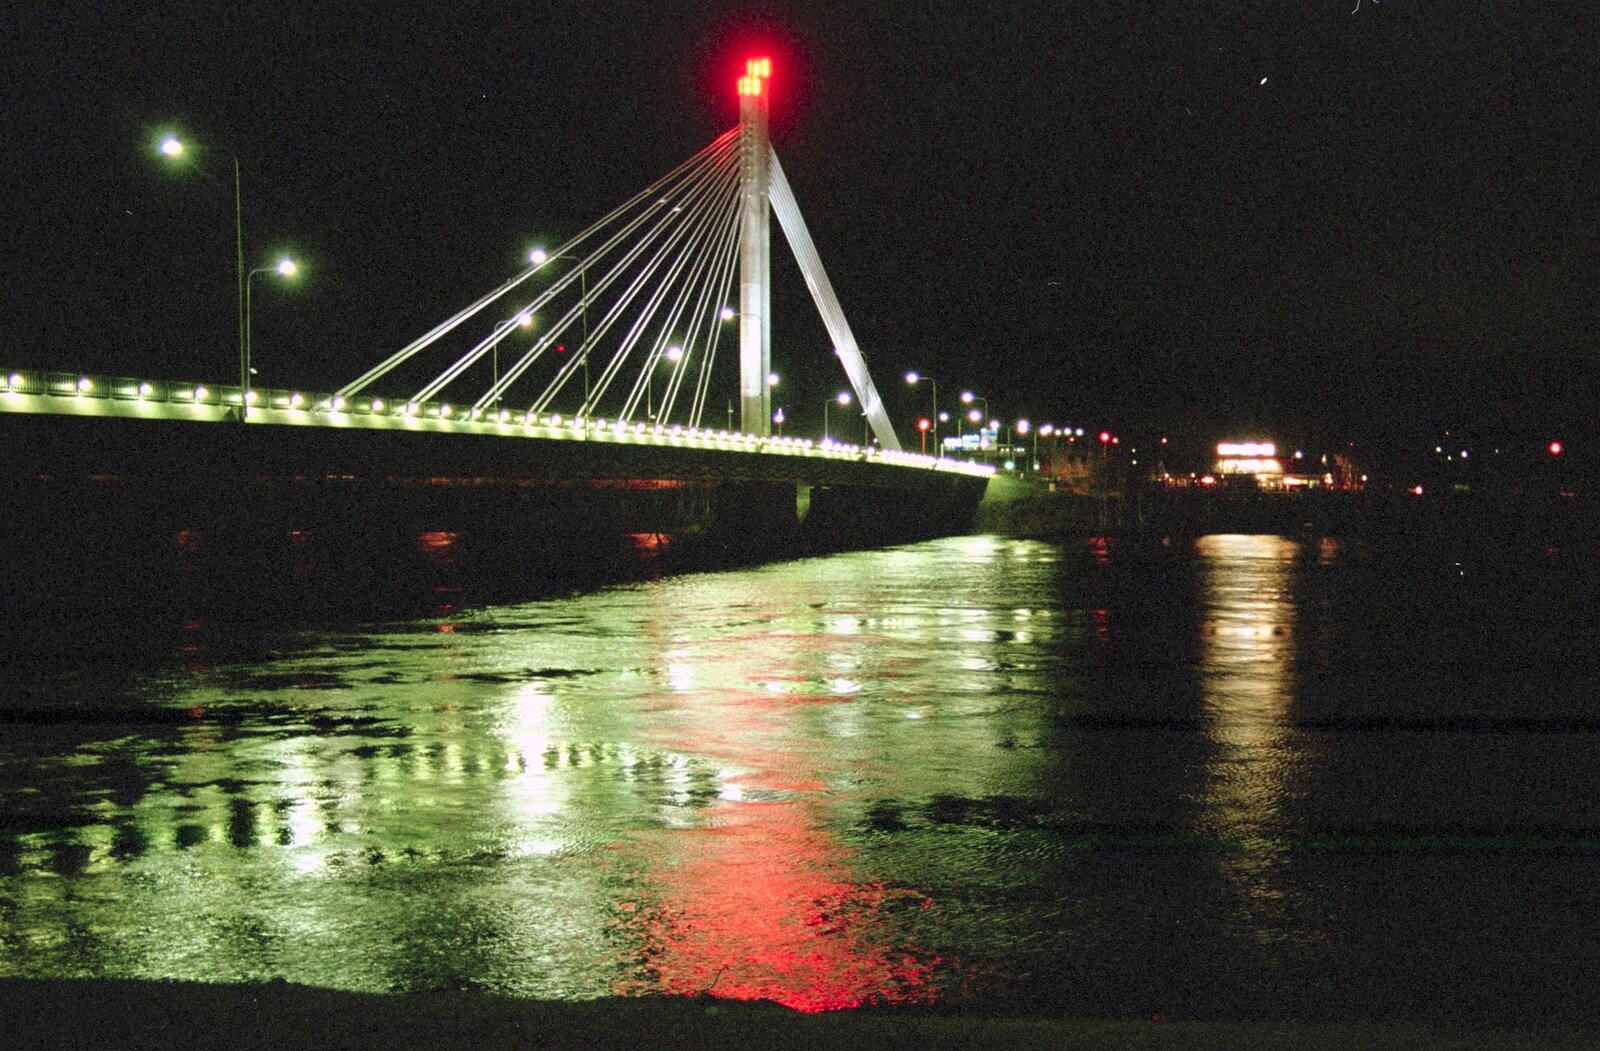 The bridge at Rovaniemi at night from A Trip to Rovaniemi and the Arctic Circle, Lapland, Finland - 28th November 1999